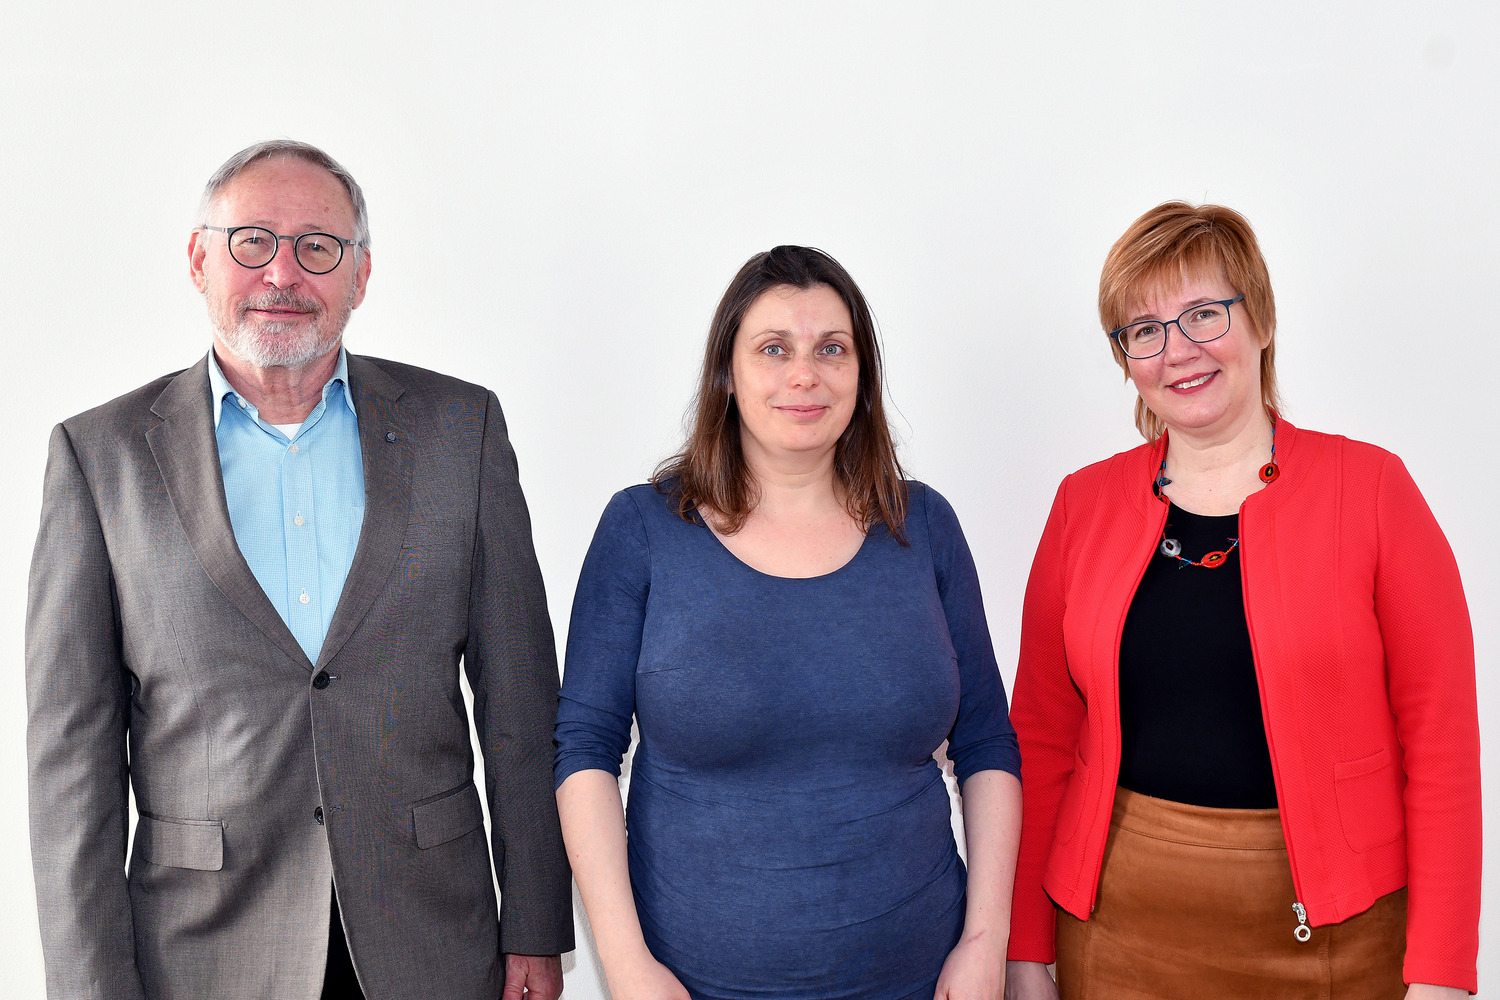 From the left: Dr. Zdeněk Hostomský (Institute Director), Prof. Angela Russell, Dr. Irena G. Stará (IOCB Invited Lectures organizer). Prague, 15 March 2022